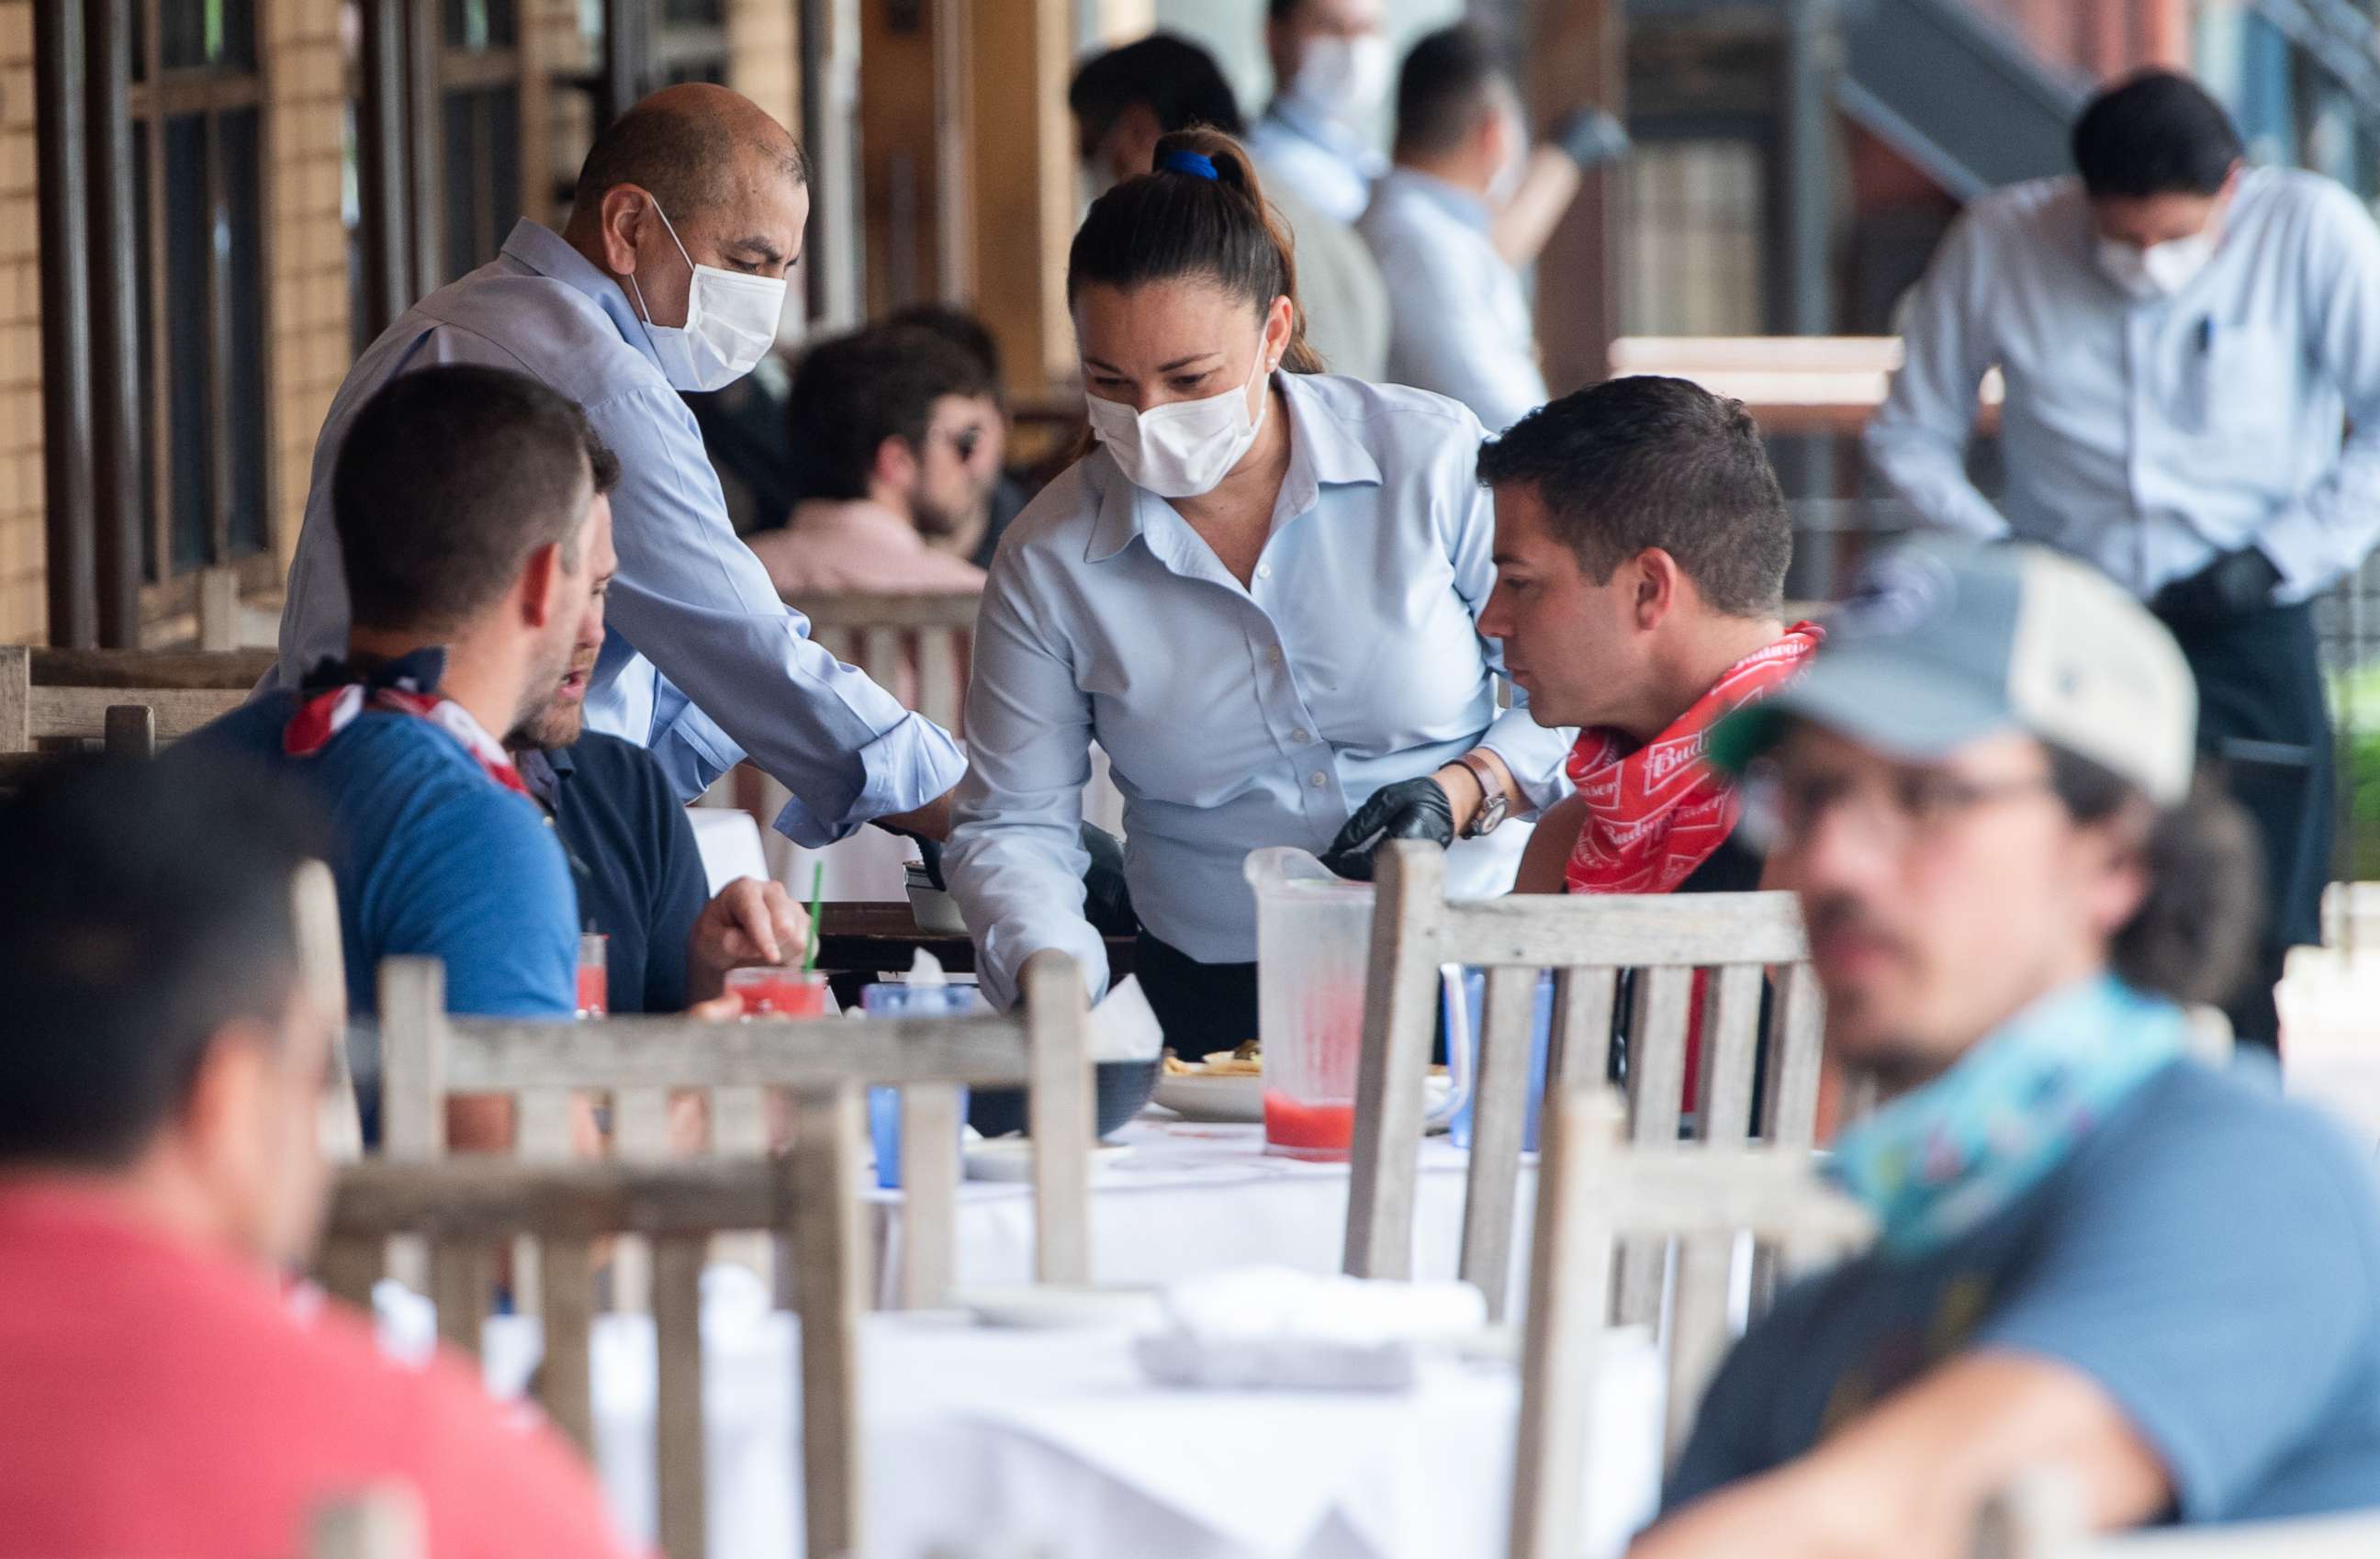 PHOTO: A waiter wearing a mask and gloves delivers food to a table to customers seated at an outdoor patio at a Mexican restaurant in Washington, D.C., May 29, 2020.